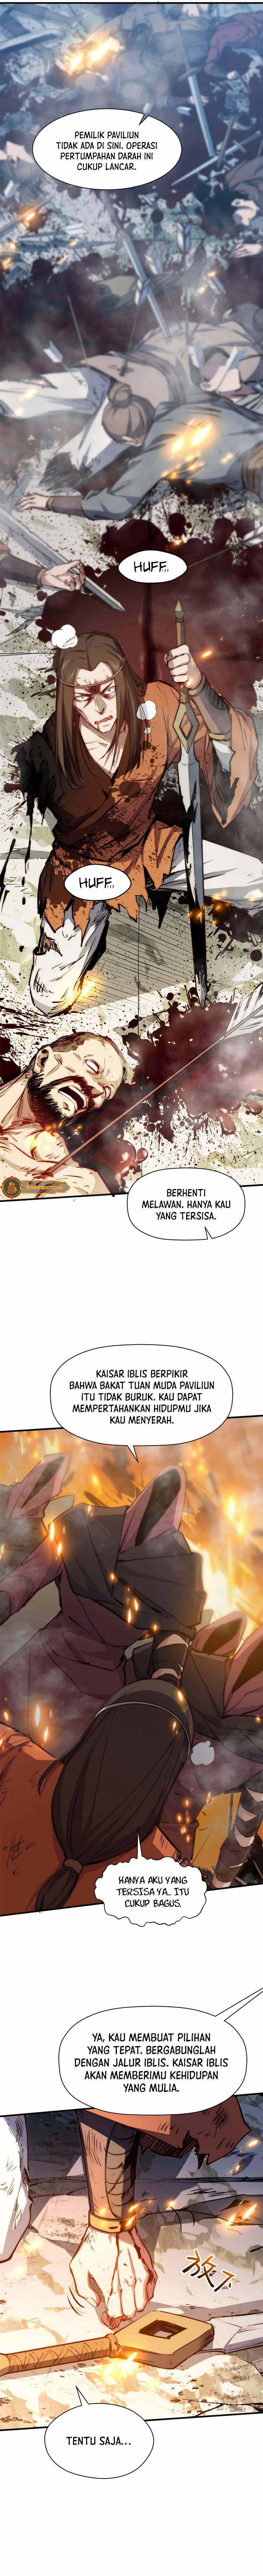 Dilarang COPAS - situs resmi www.mangacanblog.com - Komik top tier providence secretly cultivate for a thousand years 131 - chapter 131 132 Indonesia top tier providence secretly cultivate for a thousand years 131 - chapter 131 Terbaru 9|Baca Manga Komik Indonesia|Mangacan